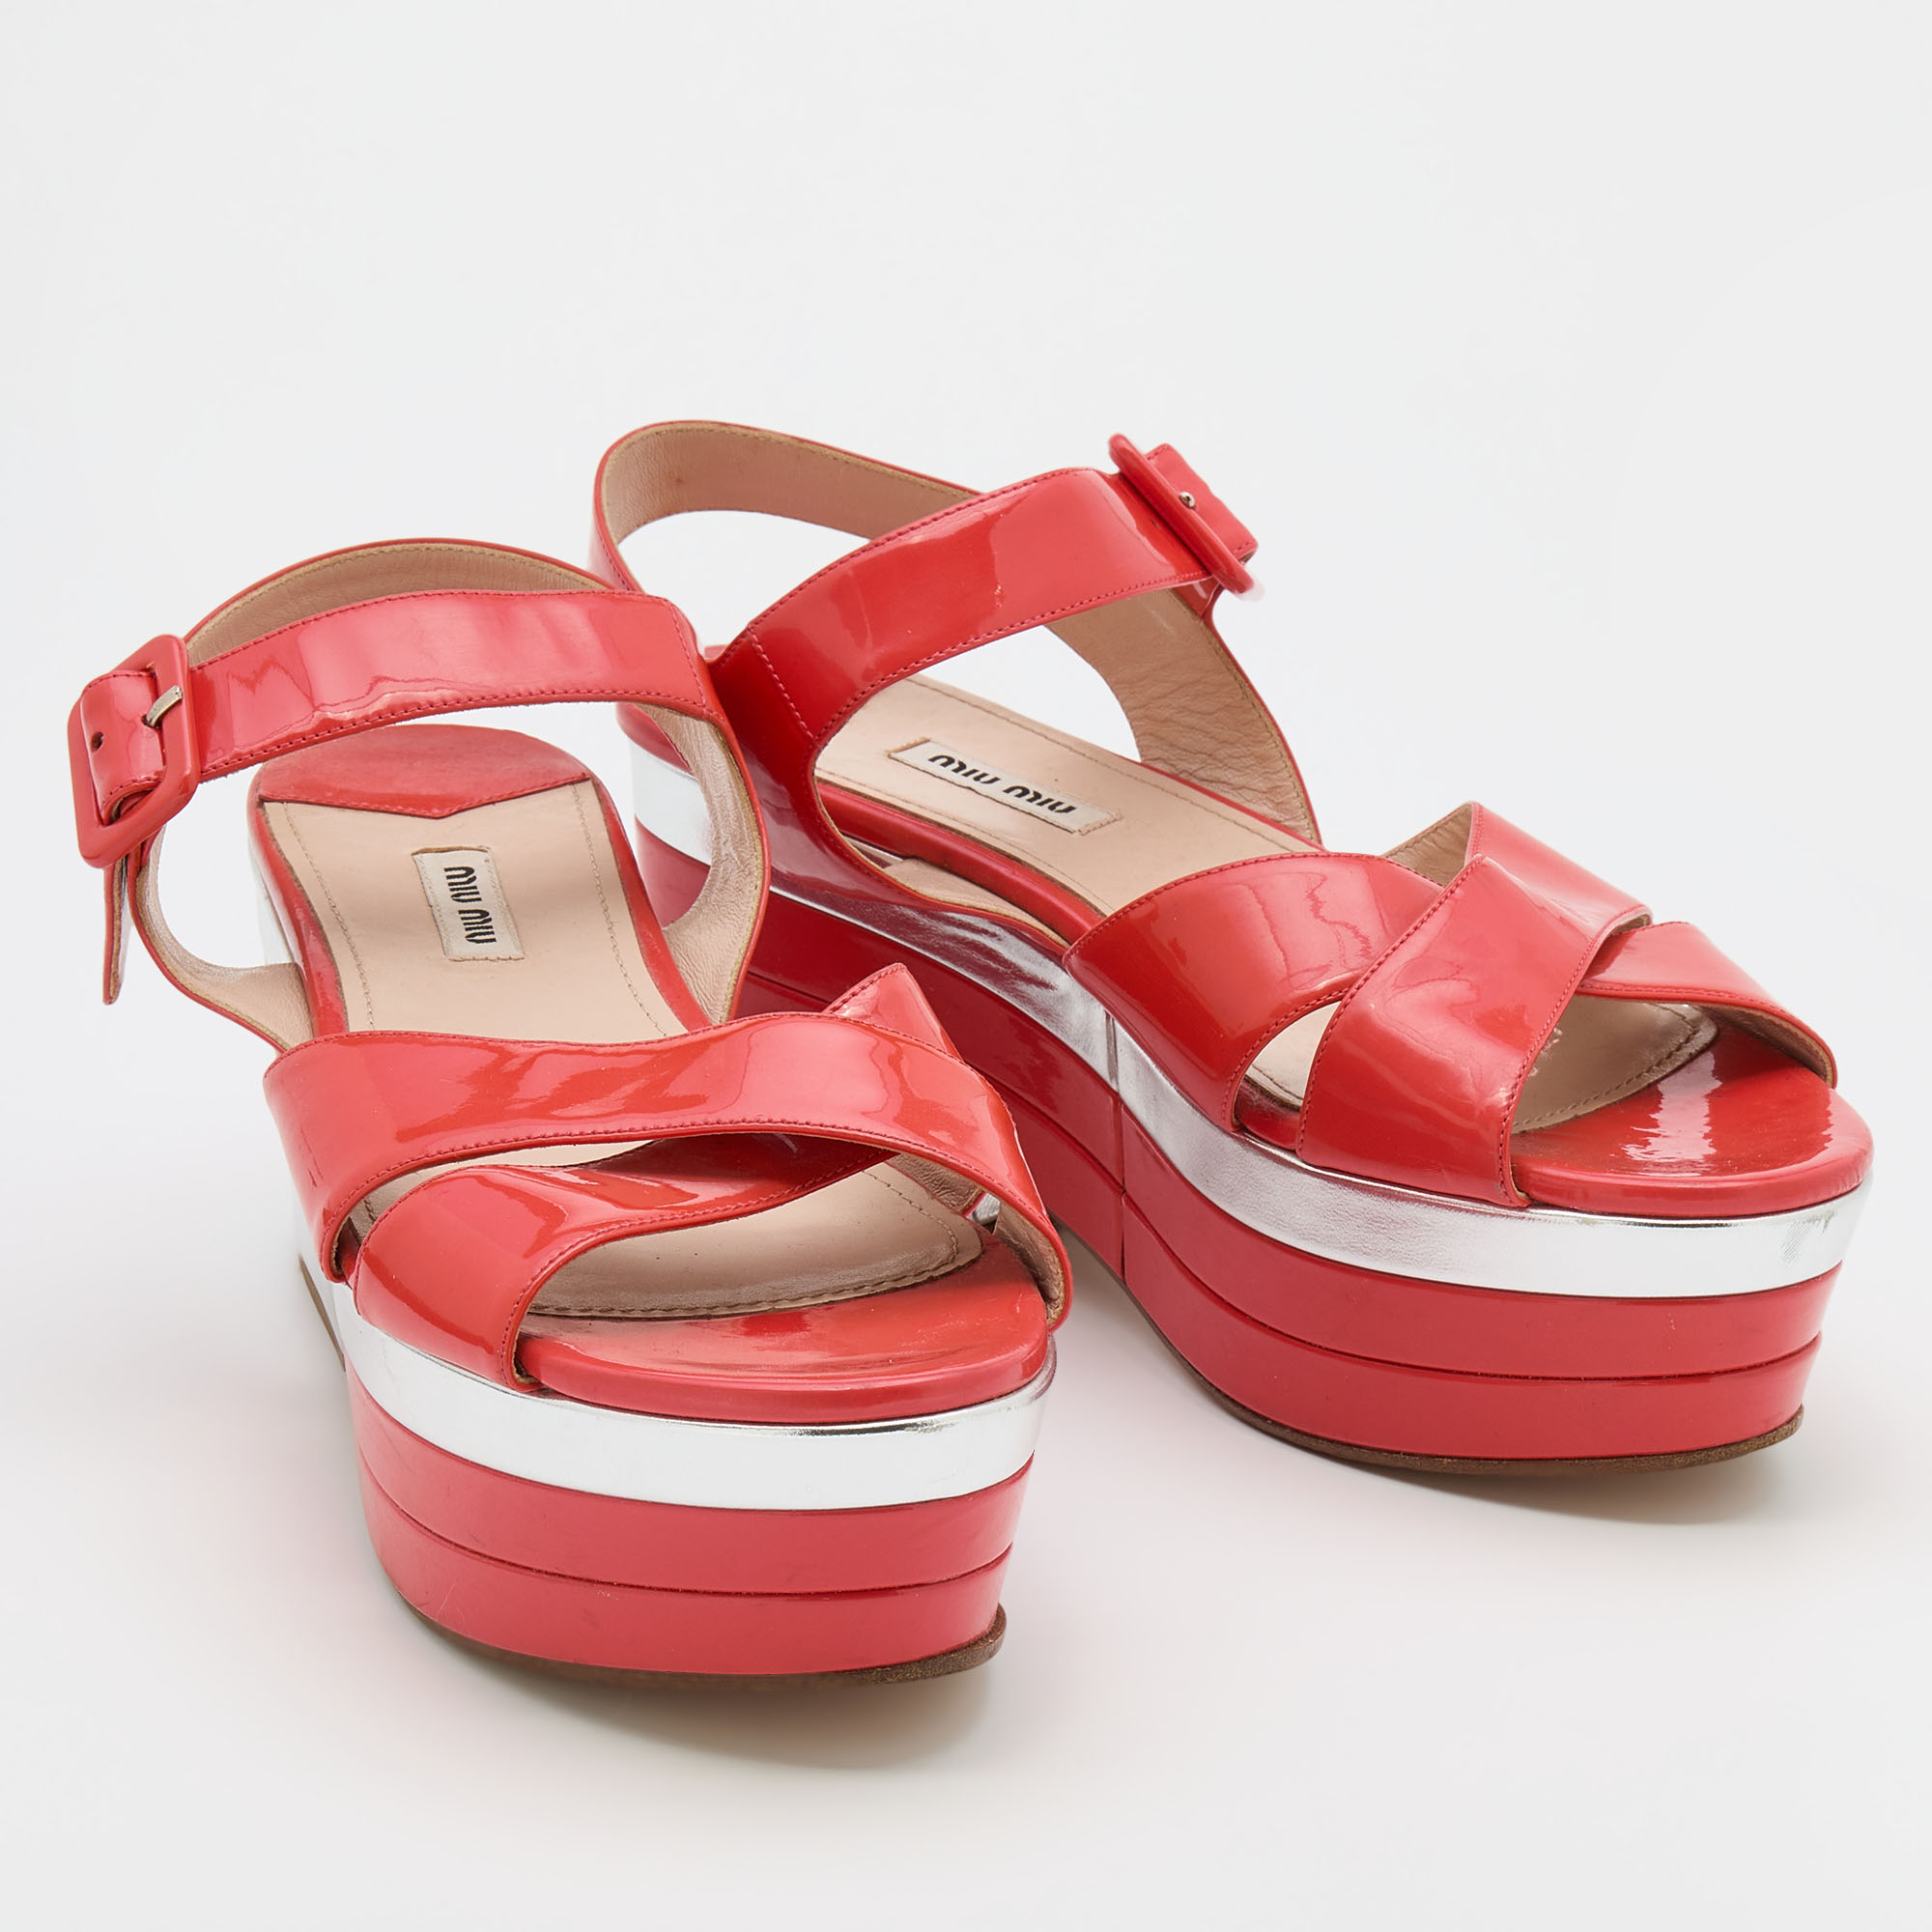 Miu Miu Coral Red Patent Leather Wedge Platform Ankle Strap Sandals Size 40